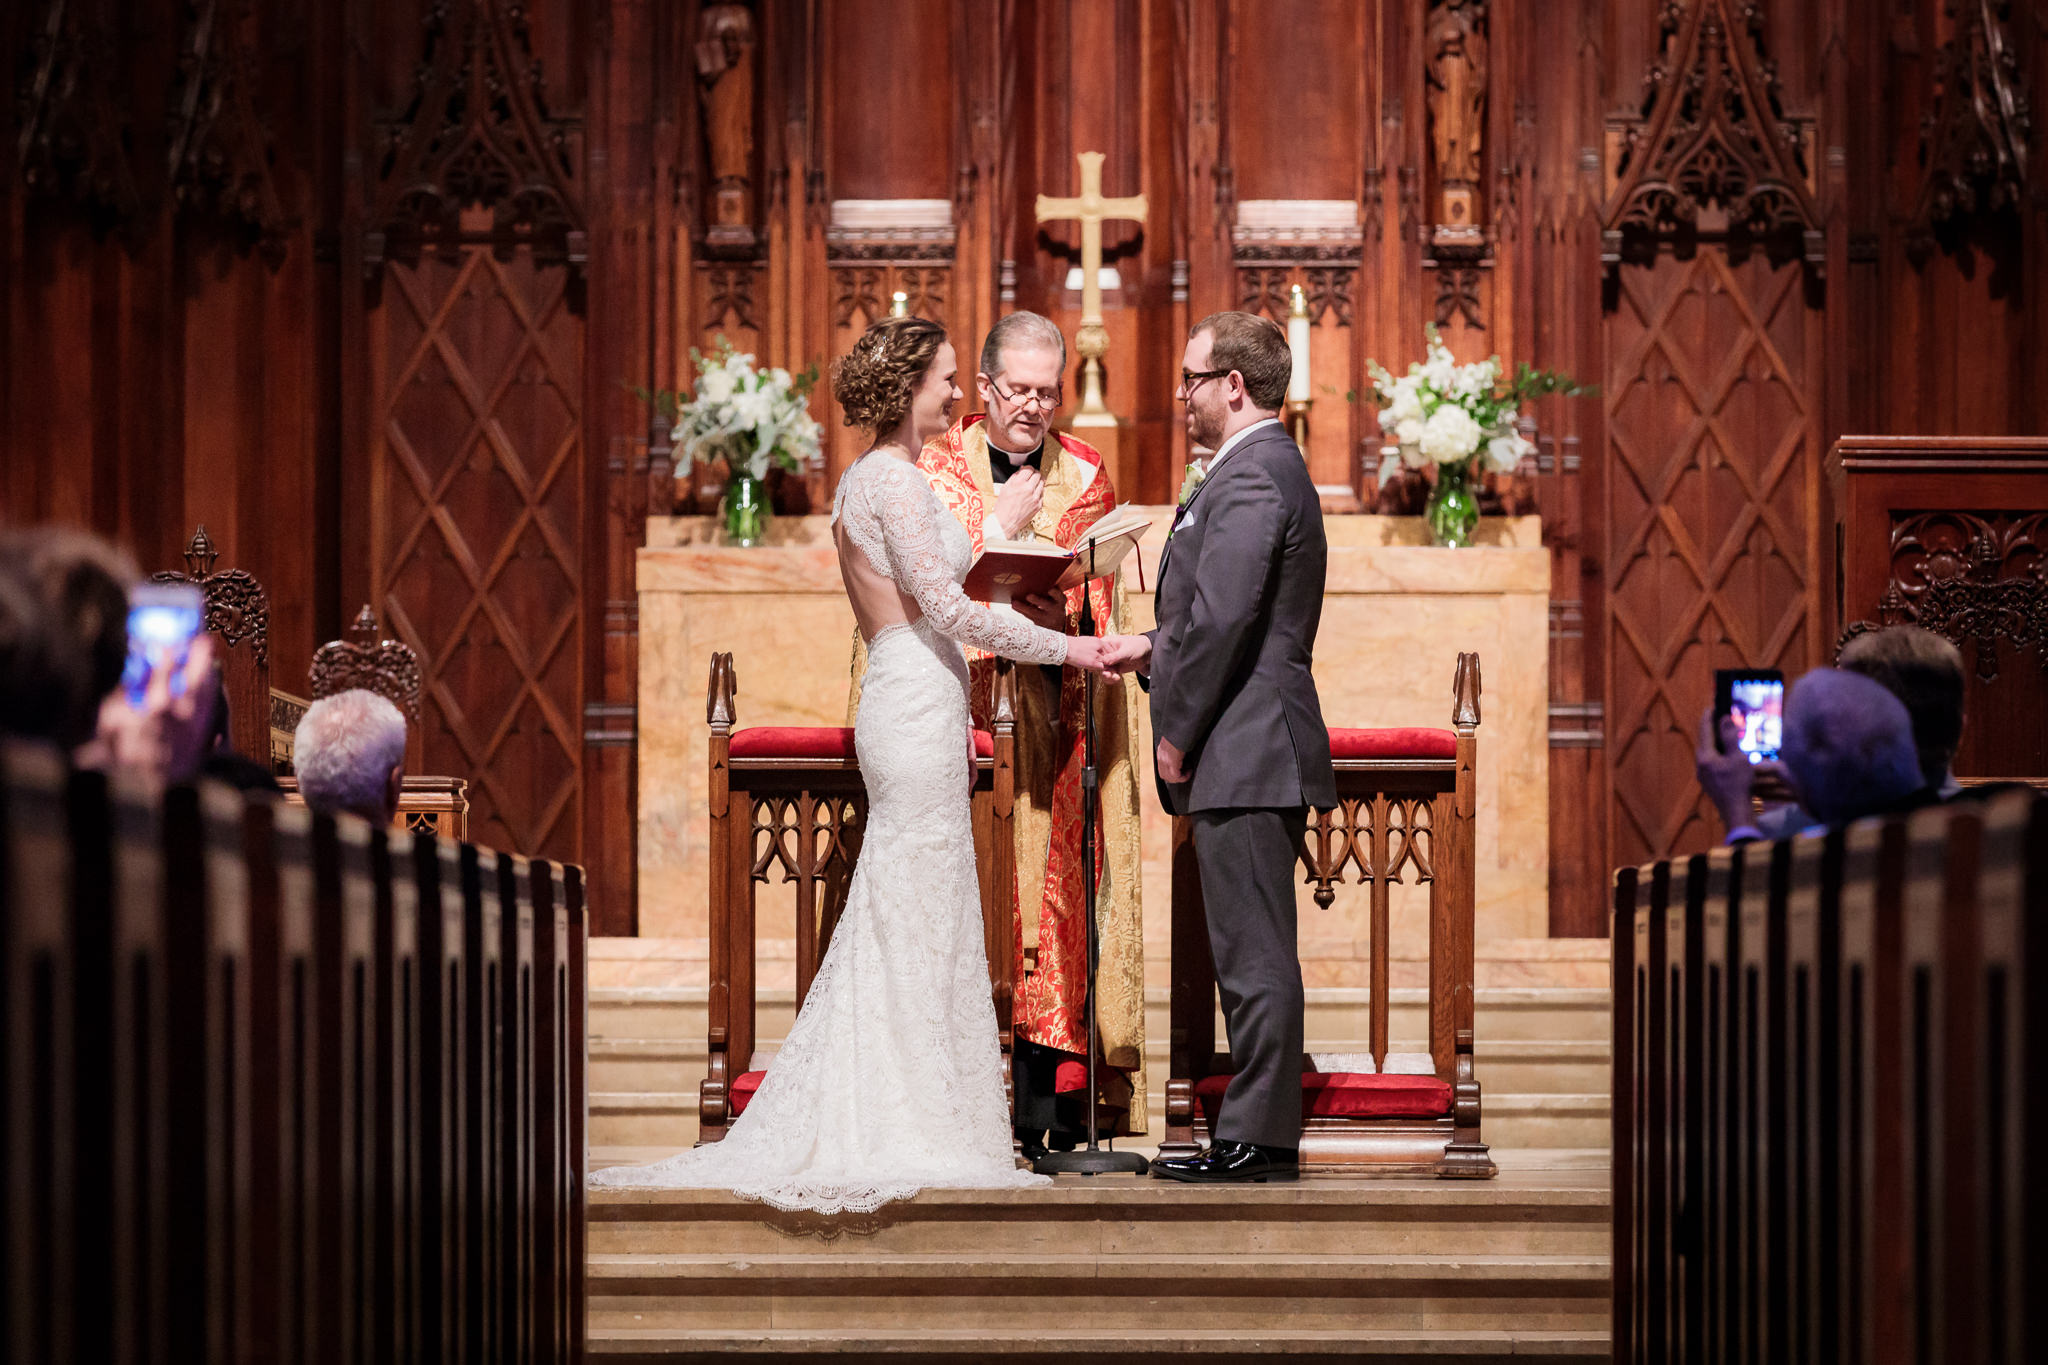 Bride and groom exchange vows at their Heinz Chapel wedding ceremony